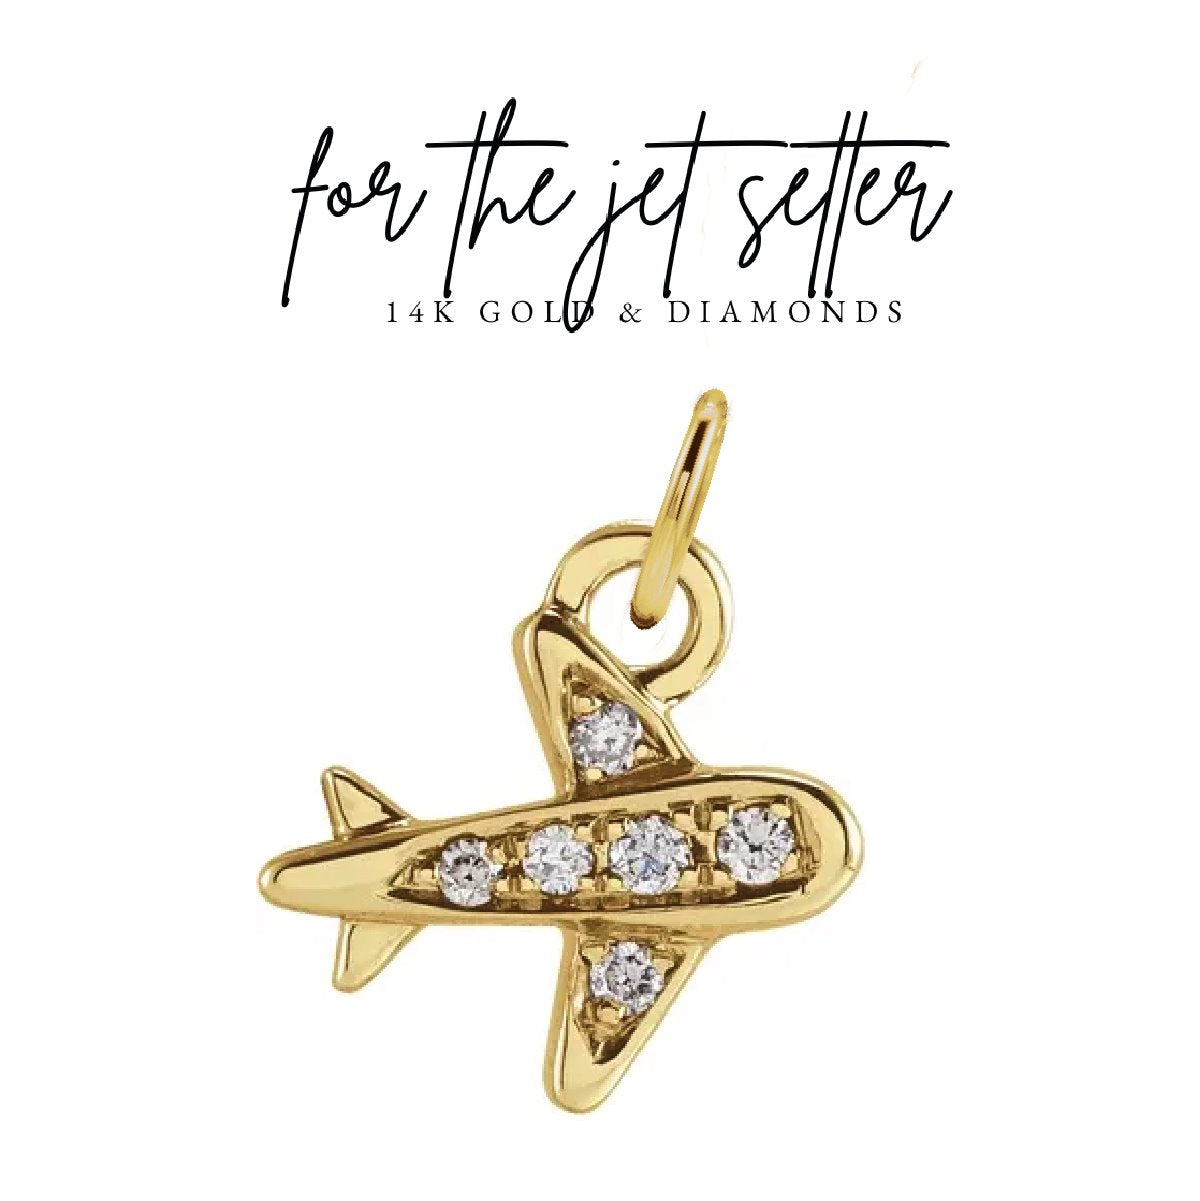 Charm Collection - For the Jet Setter Robyn Canady 